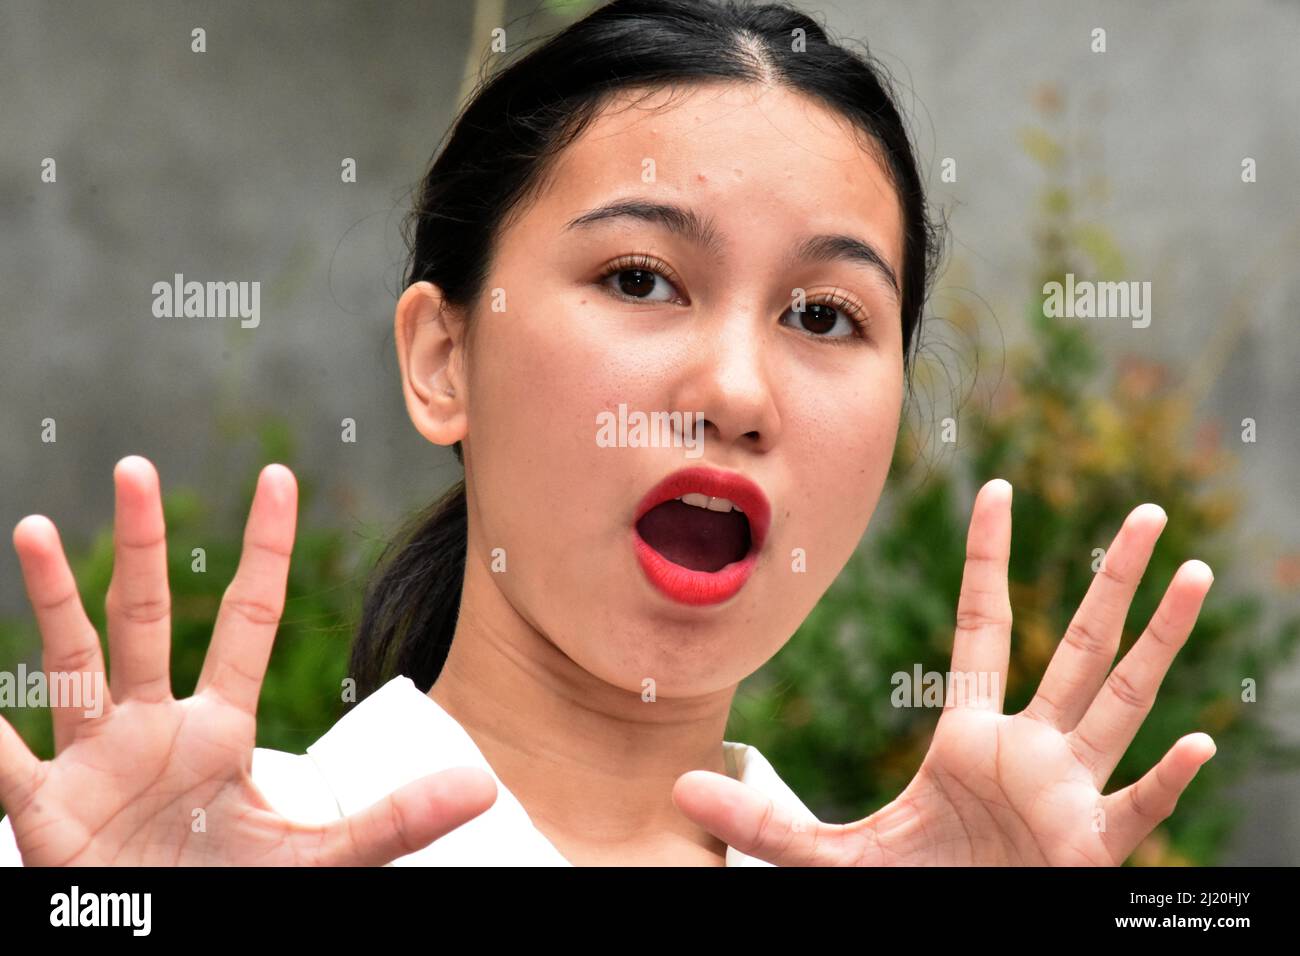 A Scared And Startled Asian Woman Stock Photo